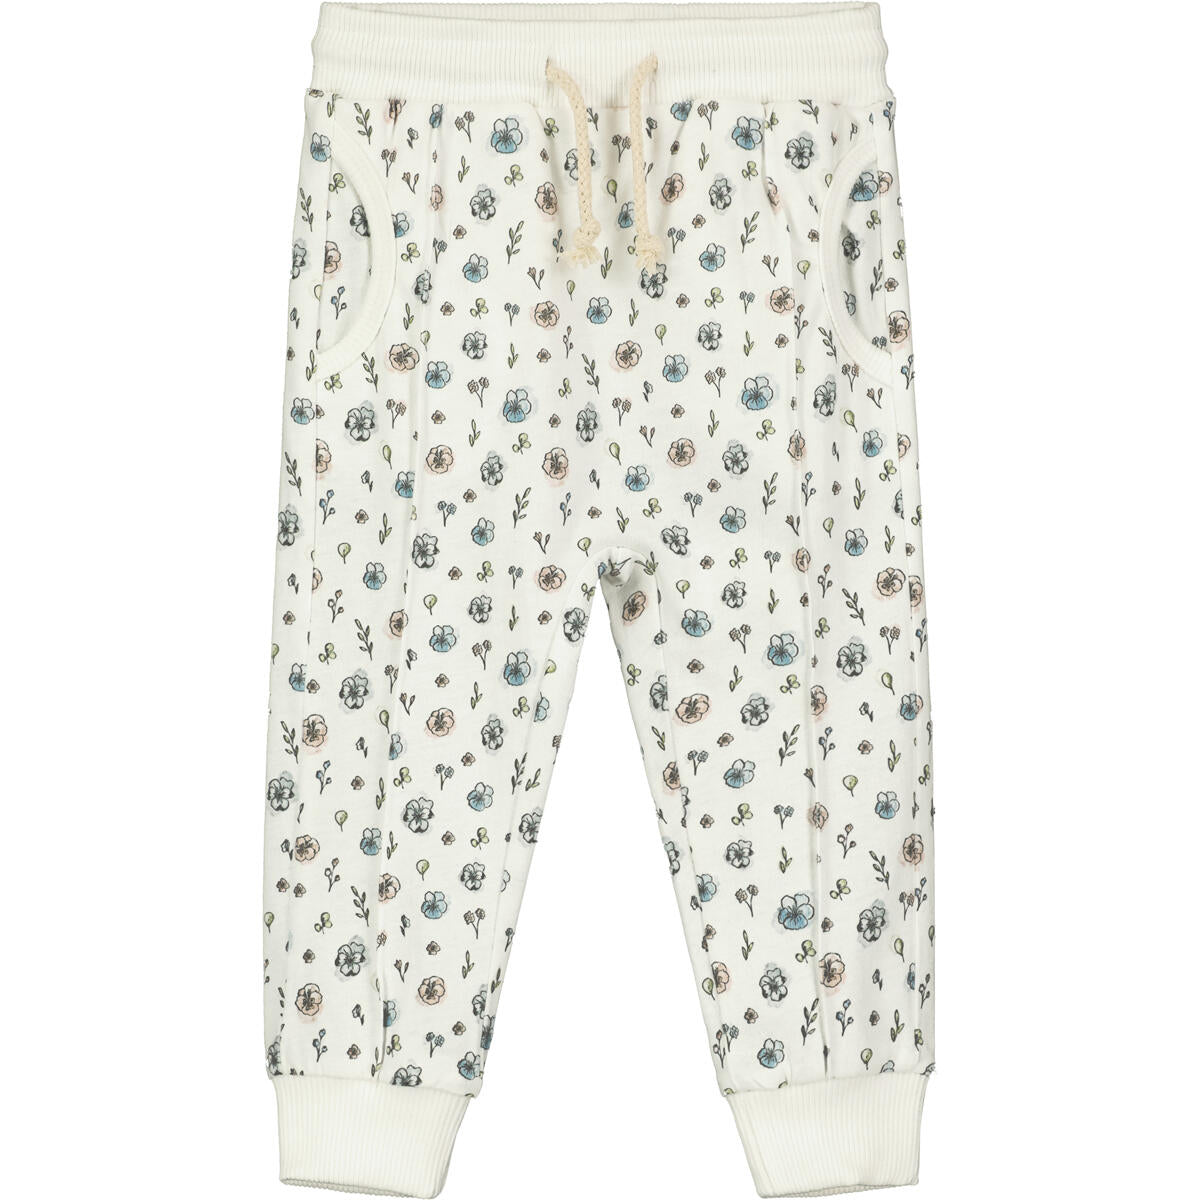 Ettie and H Jonas floral white sweatpants, pockets, cotton, pink and blue floral, white background, little girl, baby girl, toddler